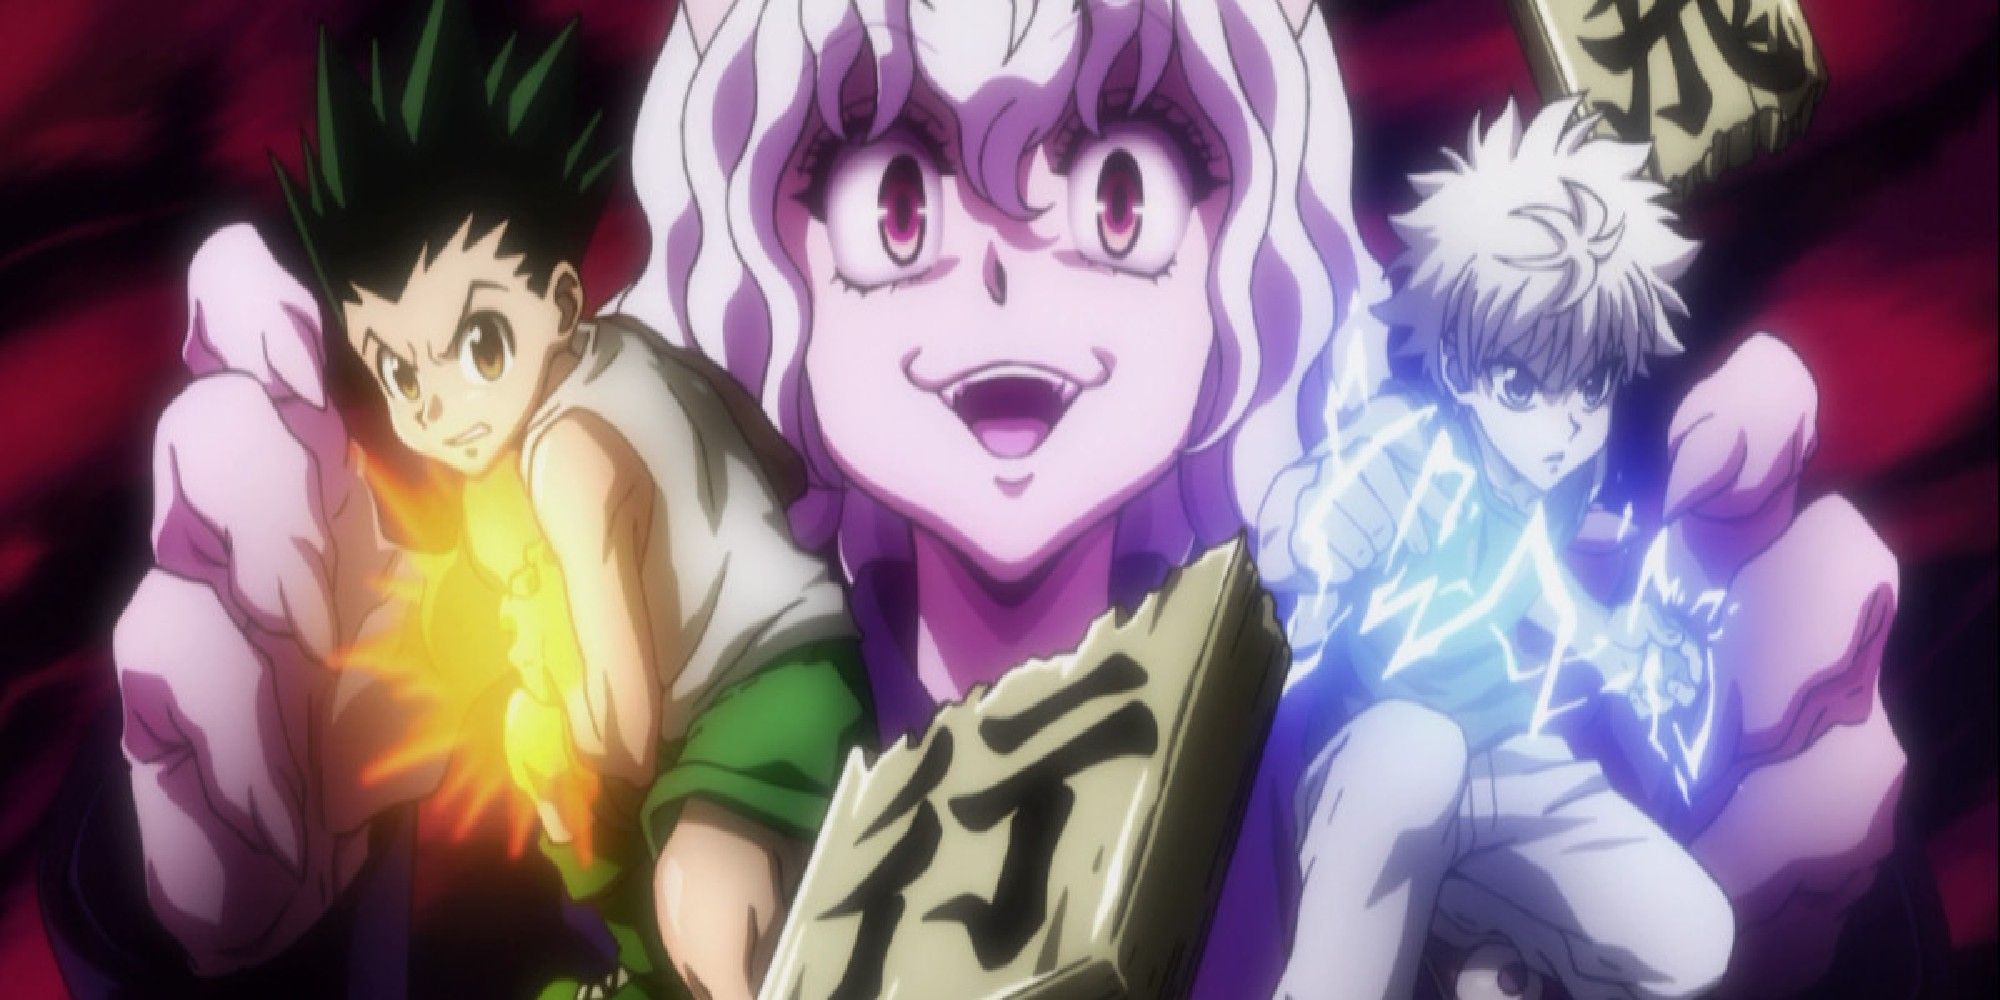 Image of Neferpitou in front of Gon and Killua